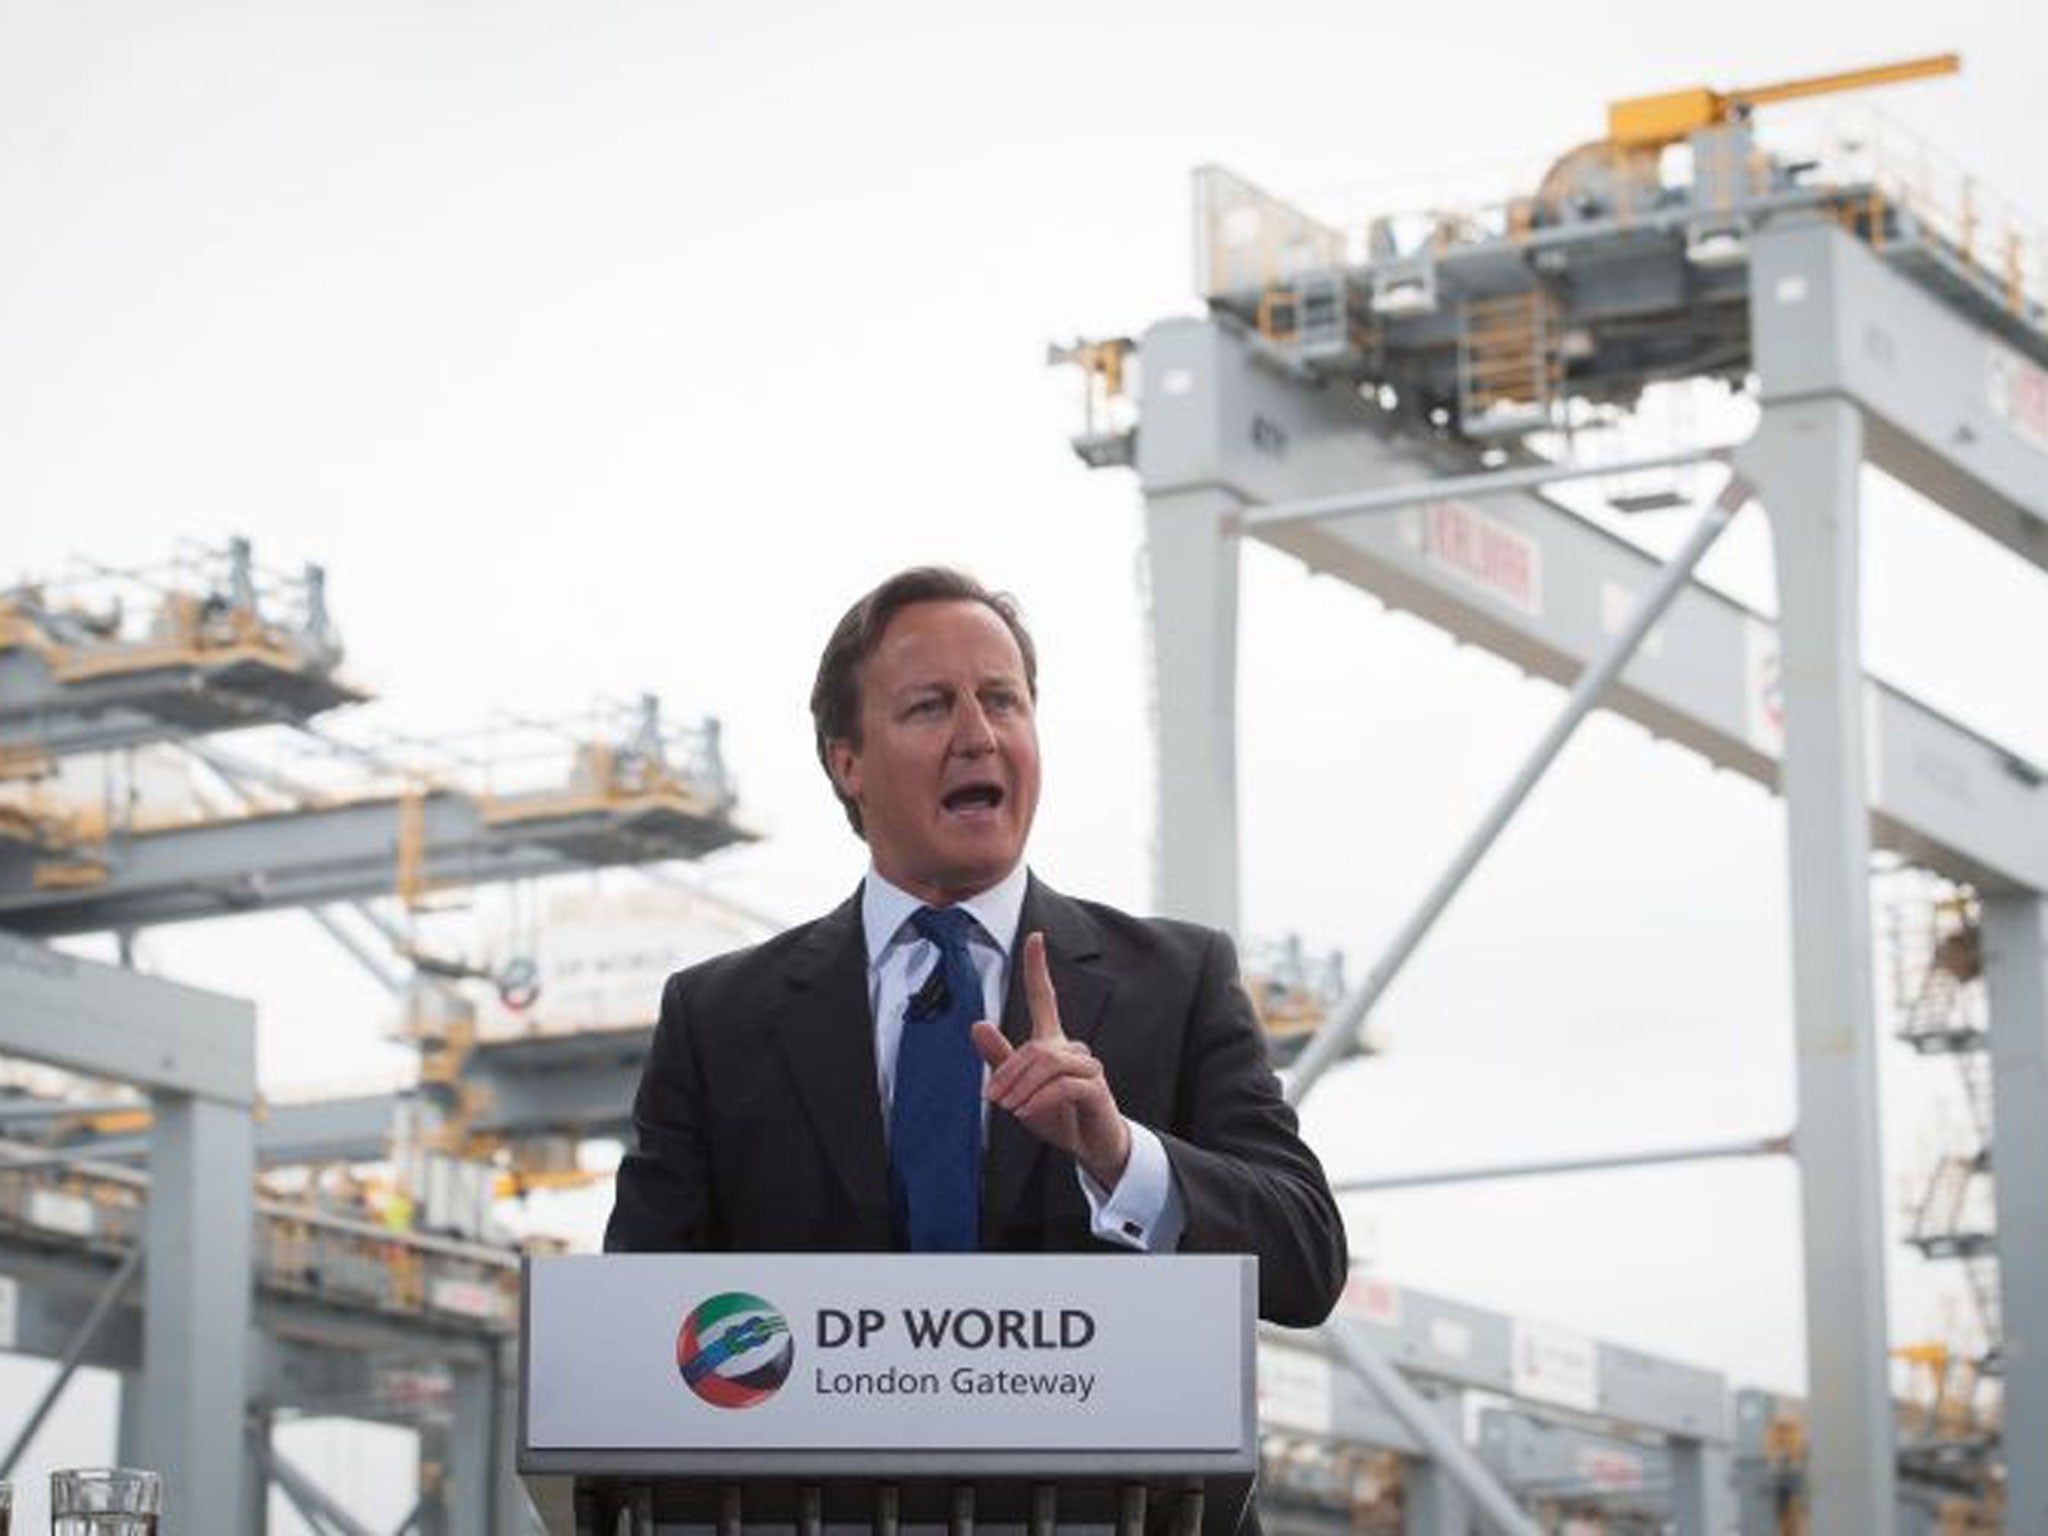 Prime Minister David Cameron delivers a speech to workers at the new London Gateway container port which is under construction on the River Thames near Tilbury in Essex